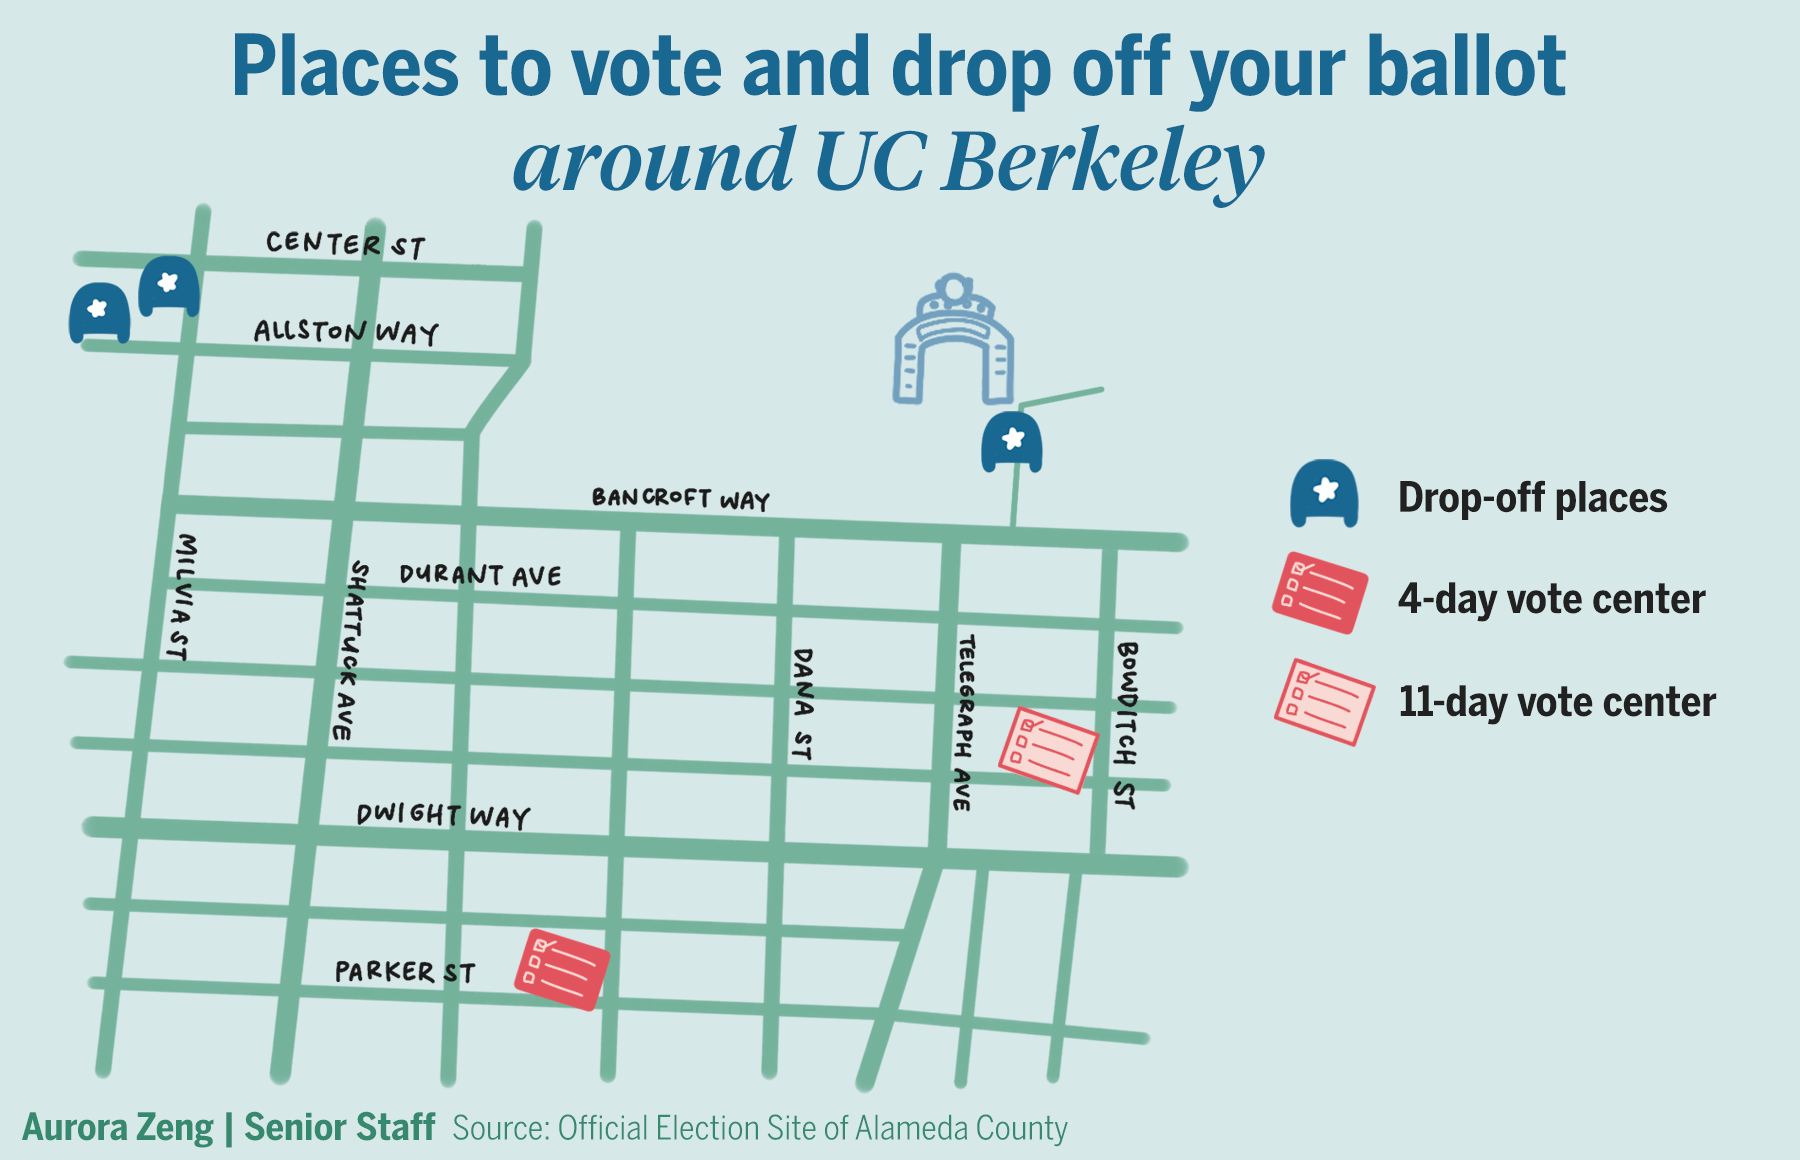 Places to vote and drop off your ballot around UC Berkeley